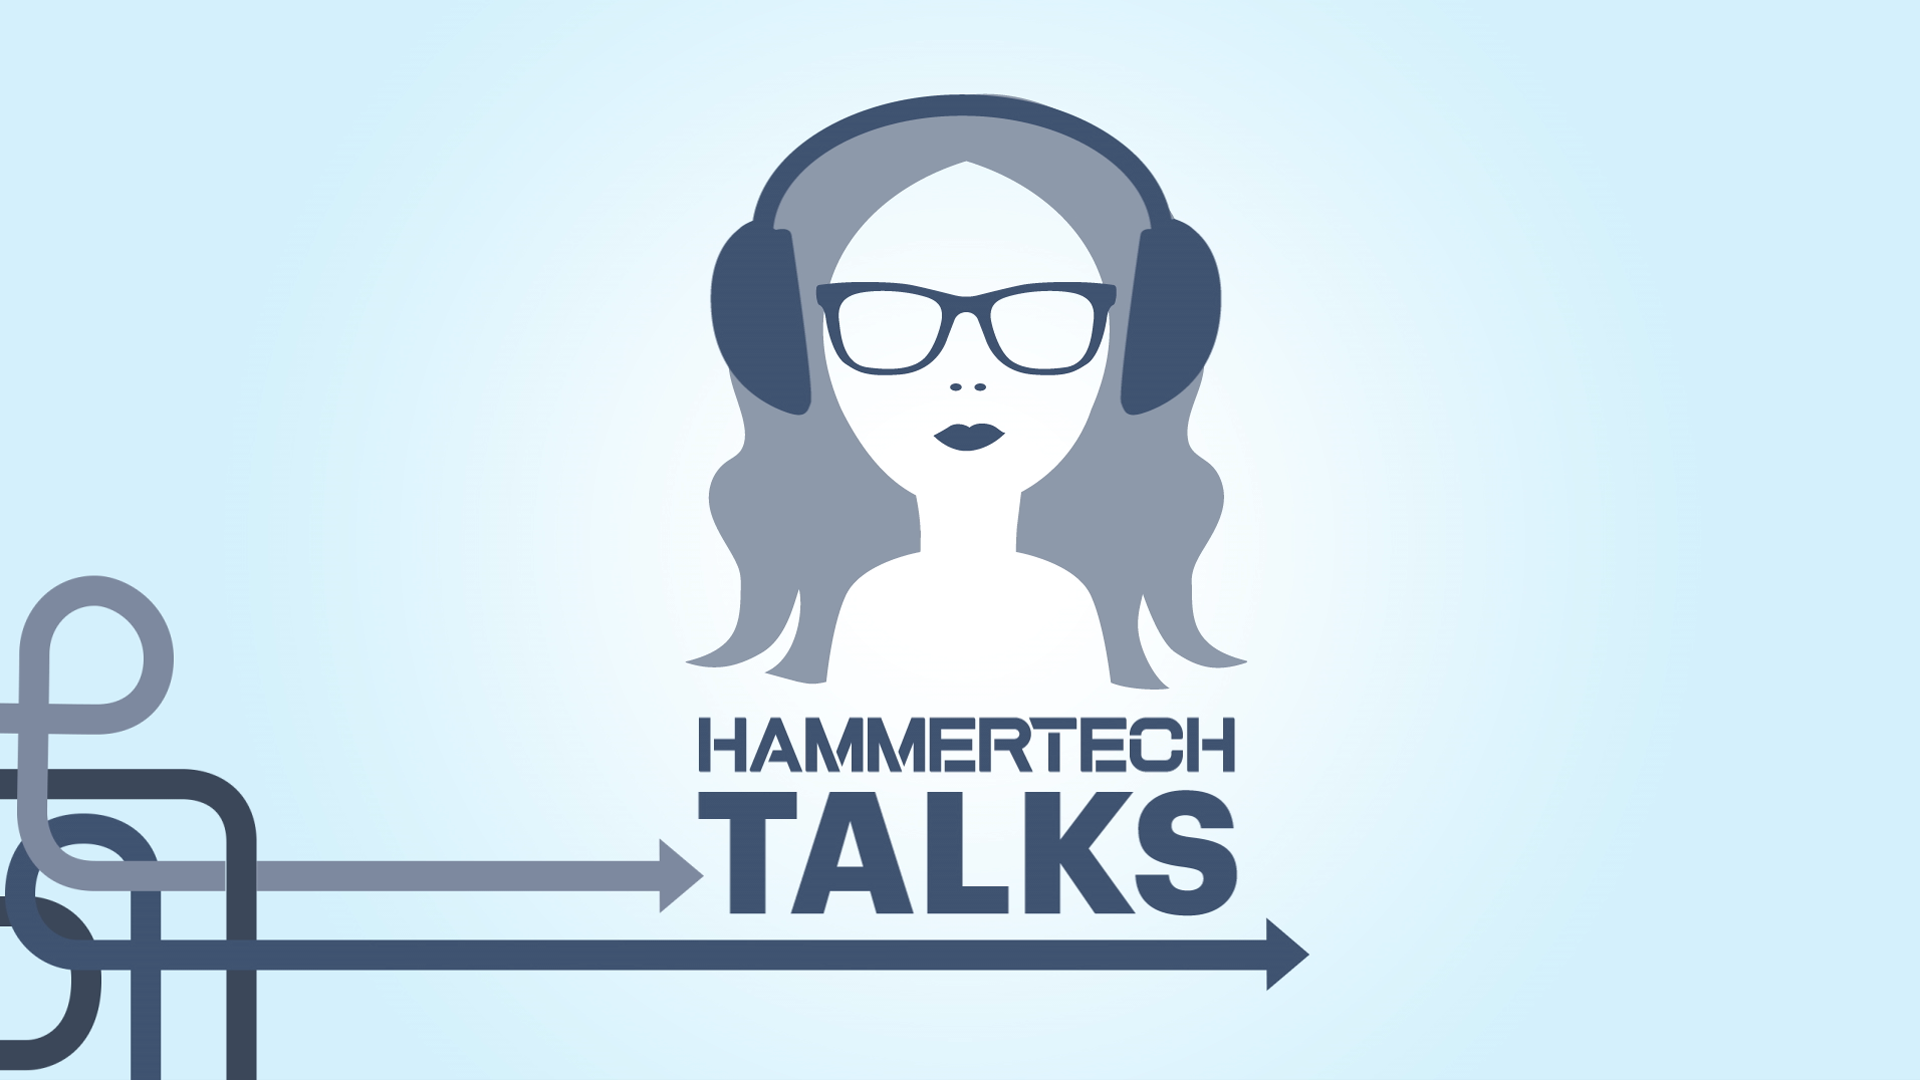 HammerTech Talks with Kathi Dobson, Safety Director at Alberici Constructors